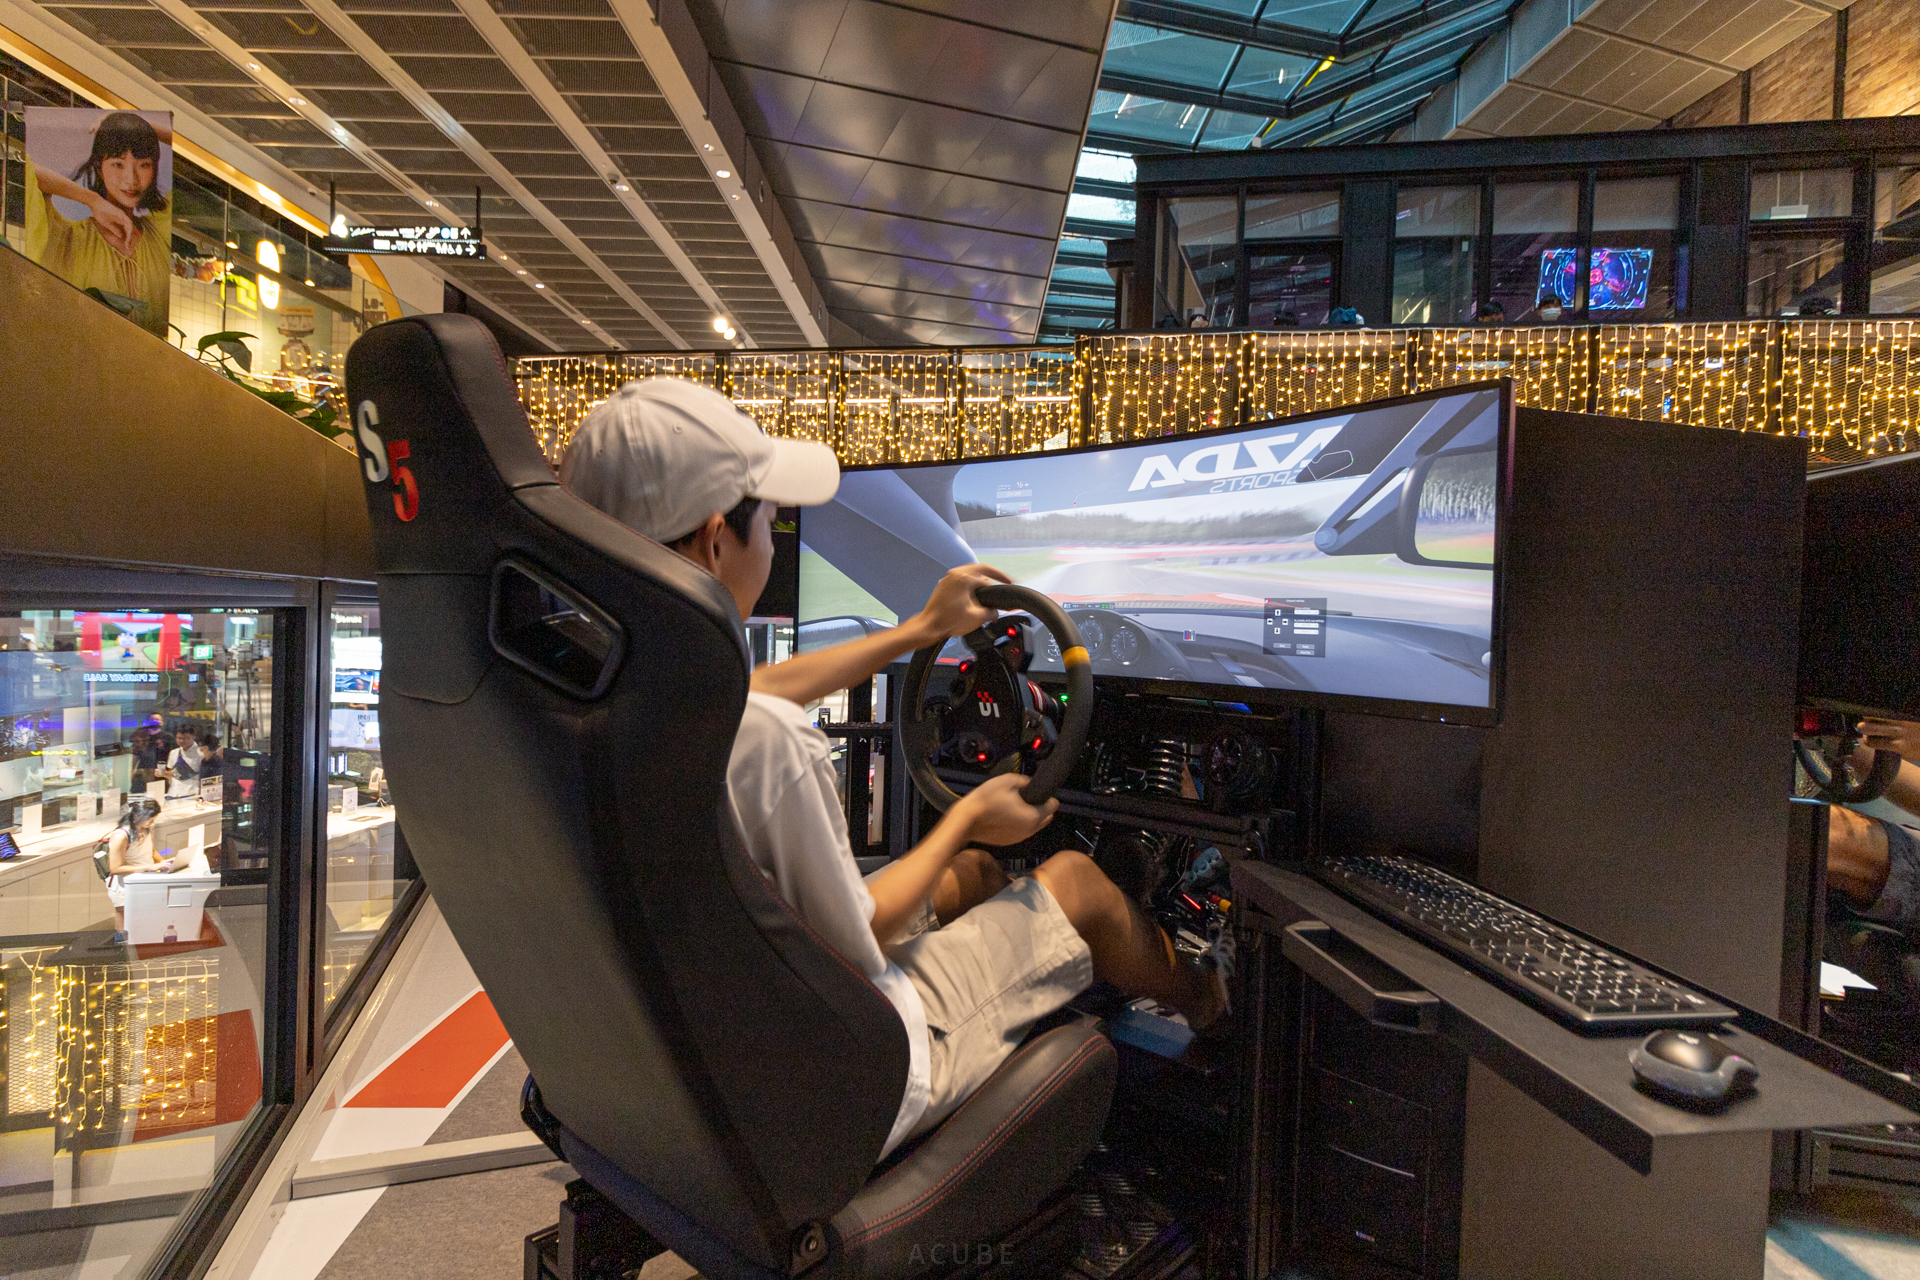 Get your professional sim racing fix with Topspeed at Funan